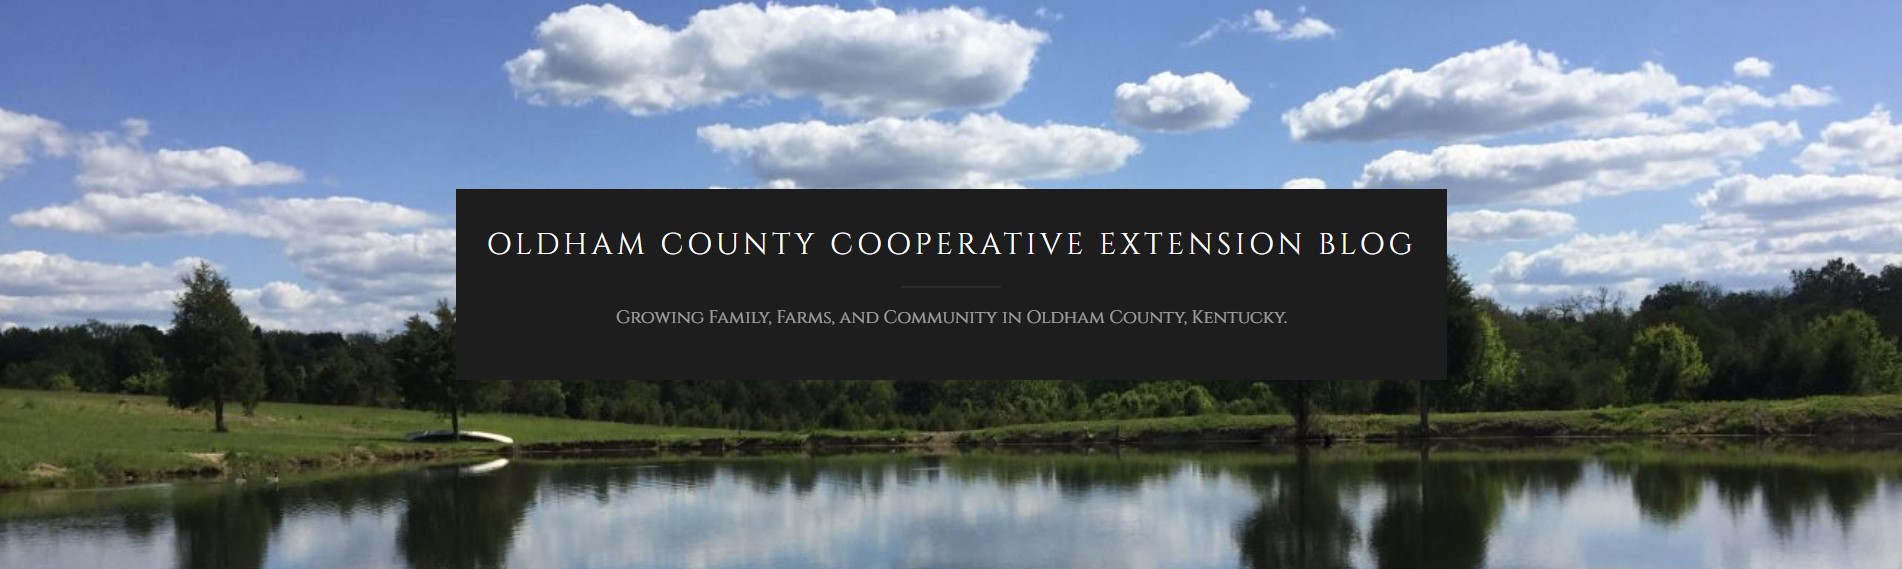 Oldham County Extension Blog Landing Page with photo of lake